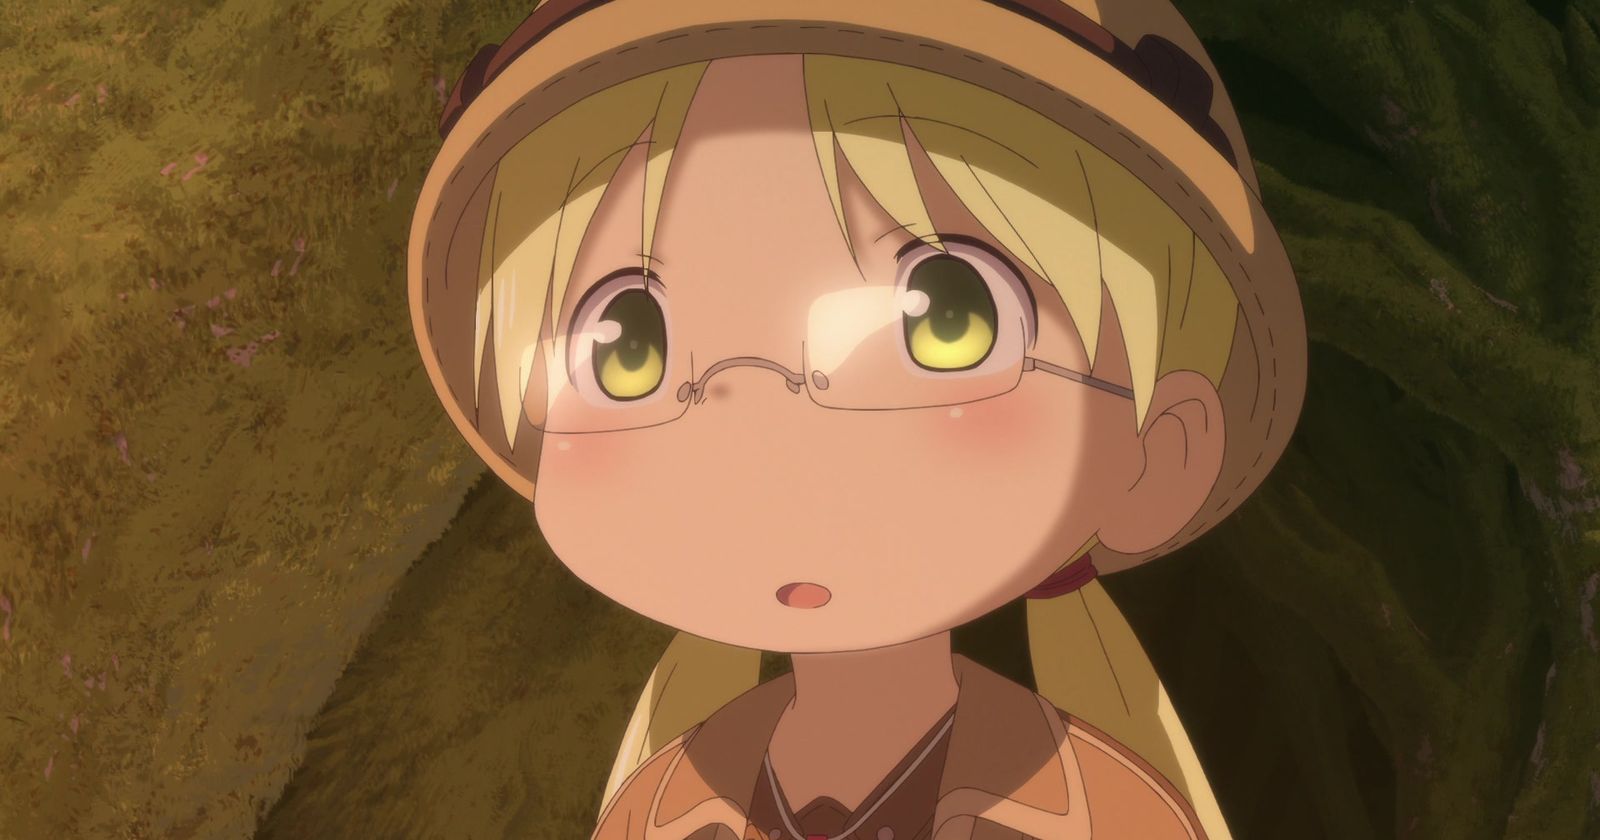 Made in Abyss Season 2: What You Need to Know Before Watching